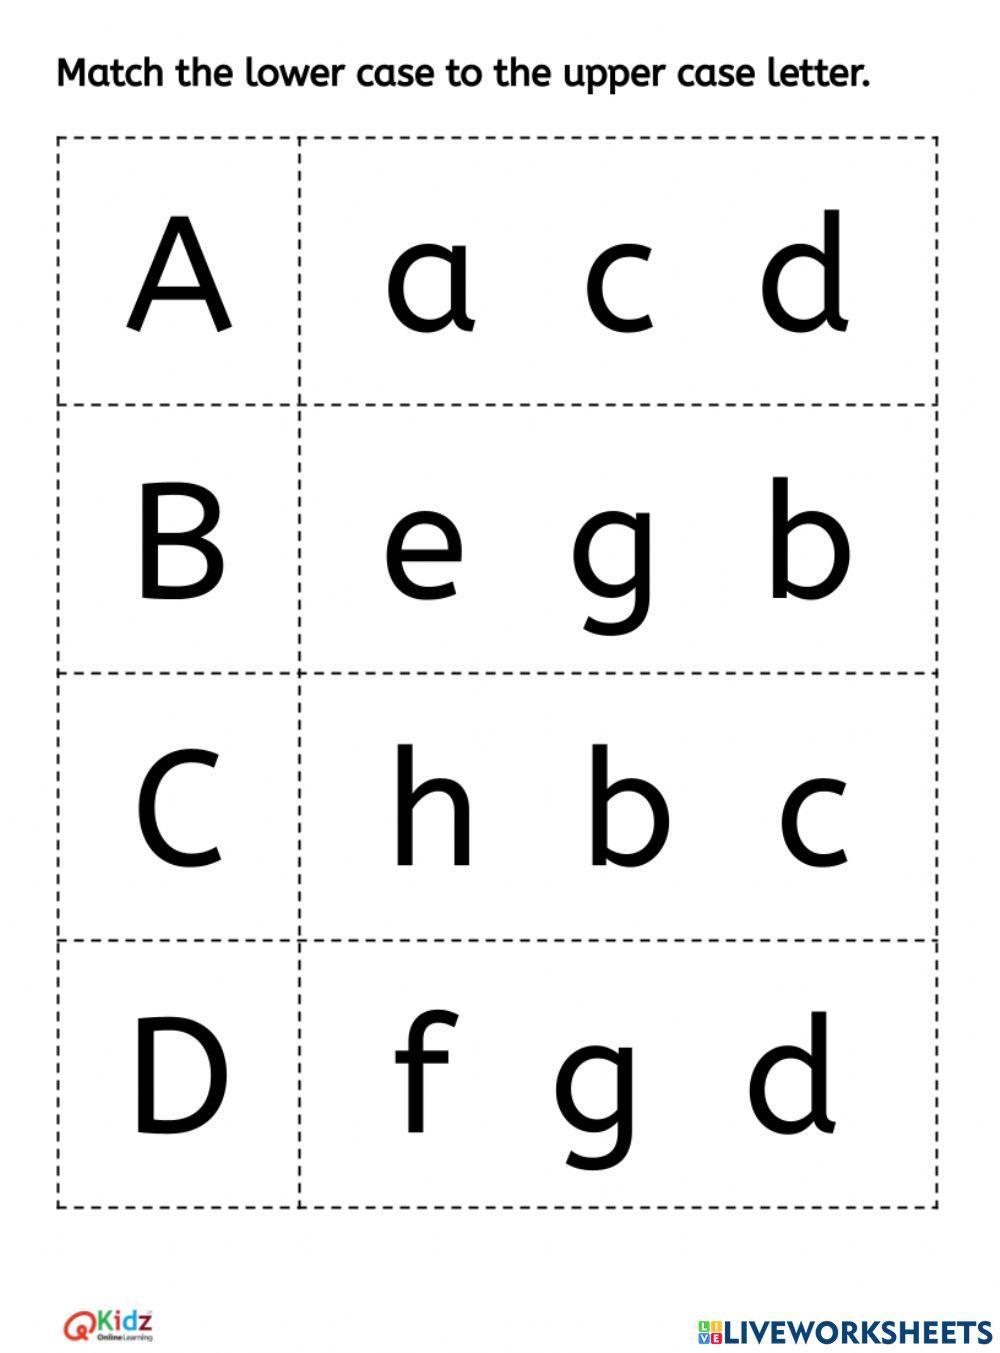 Match the Letters -Lower case to the Upper case